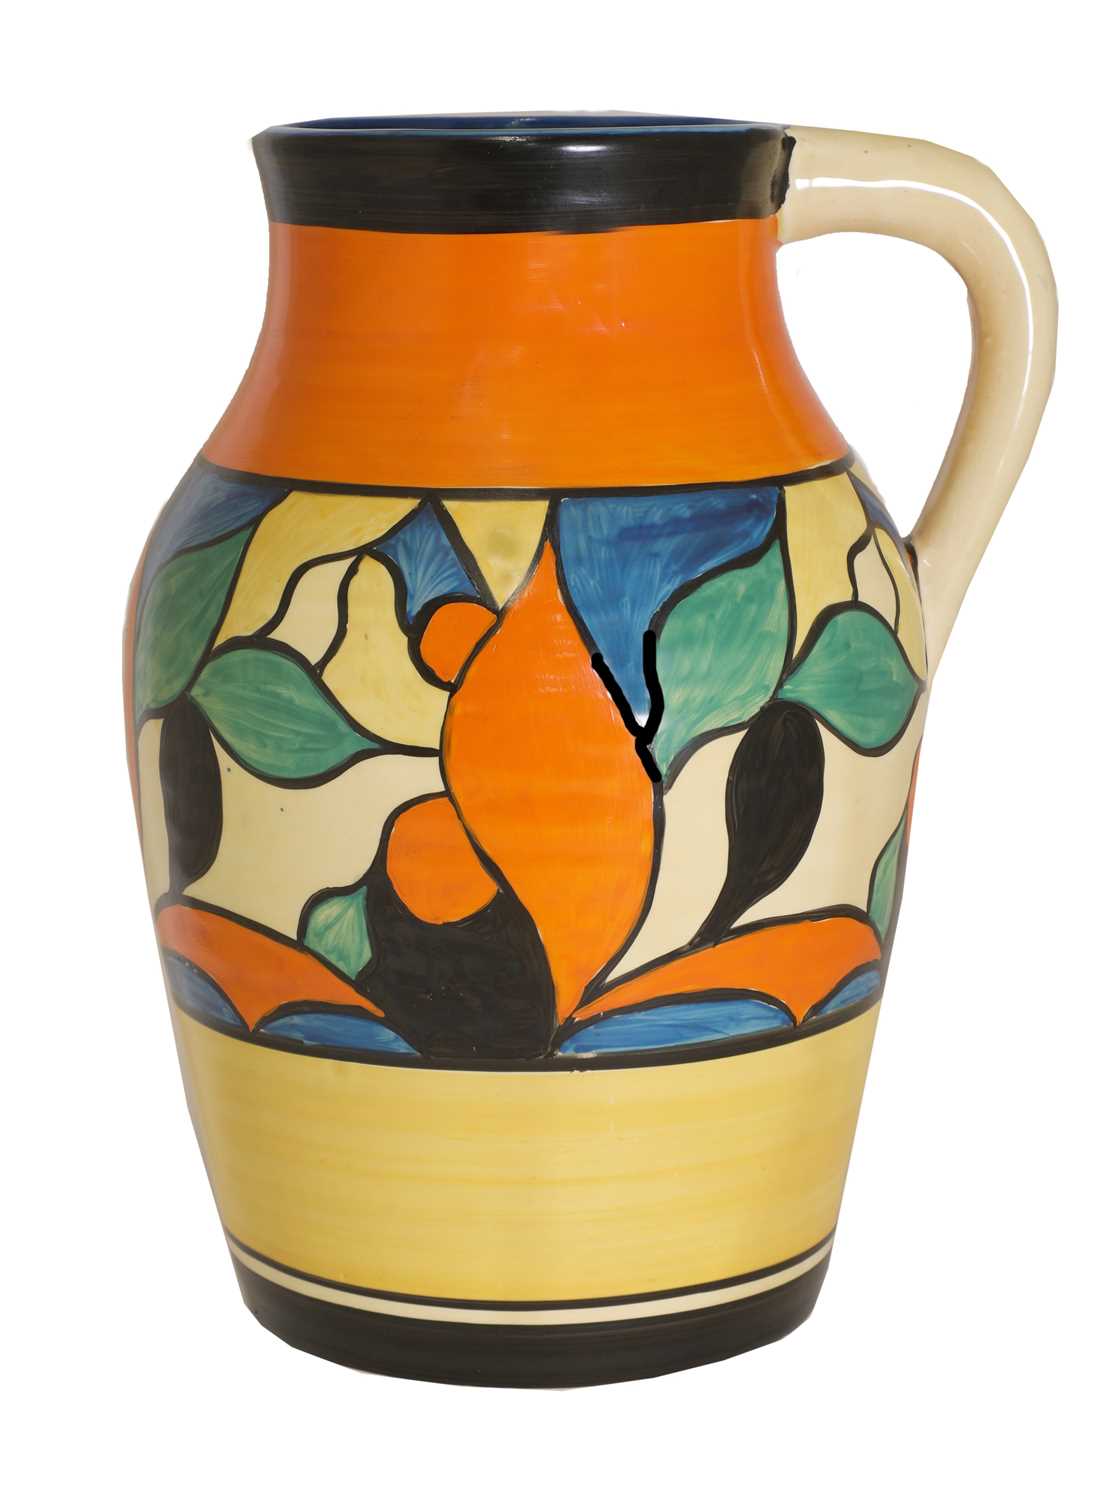 Lot 73 - A Clarice Cliff floral pattern Lotus jug